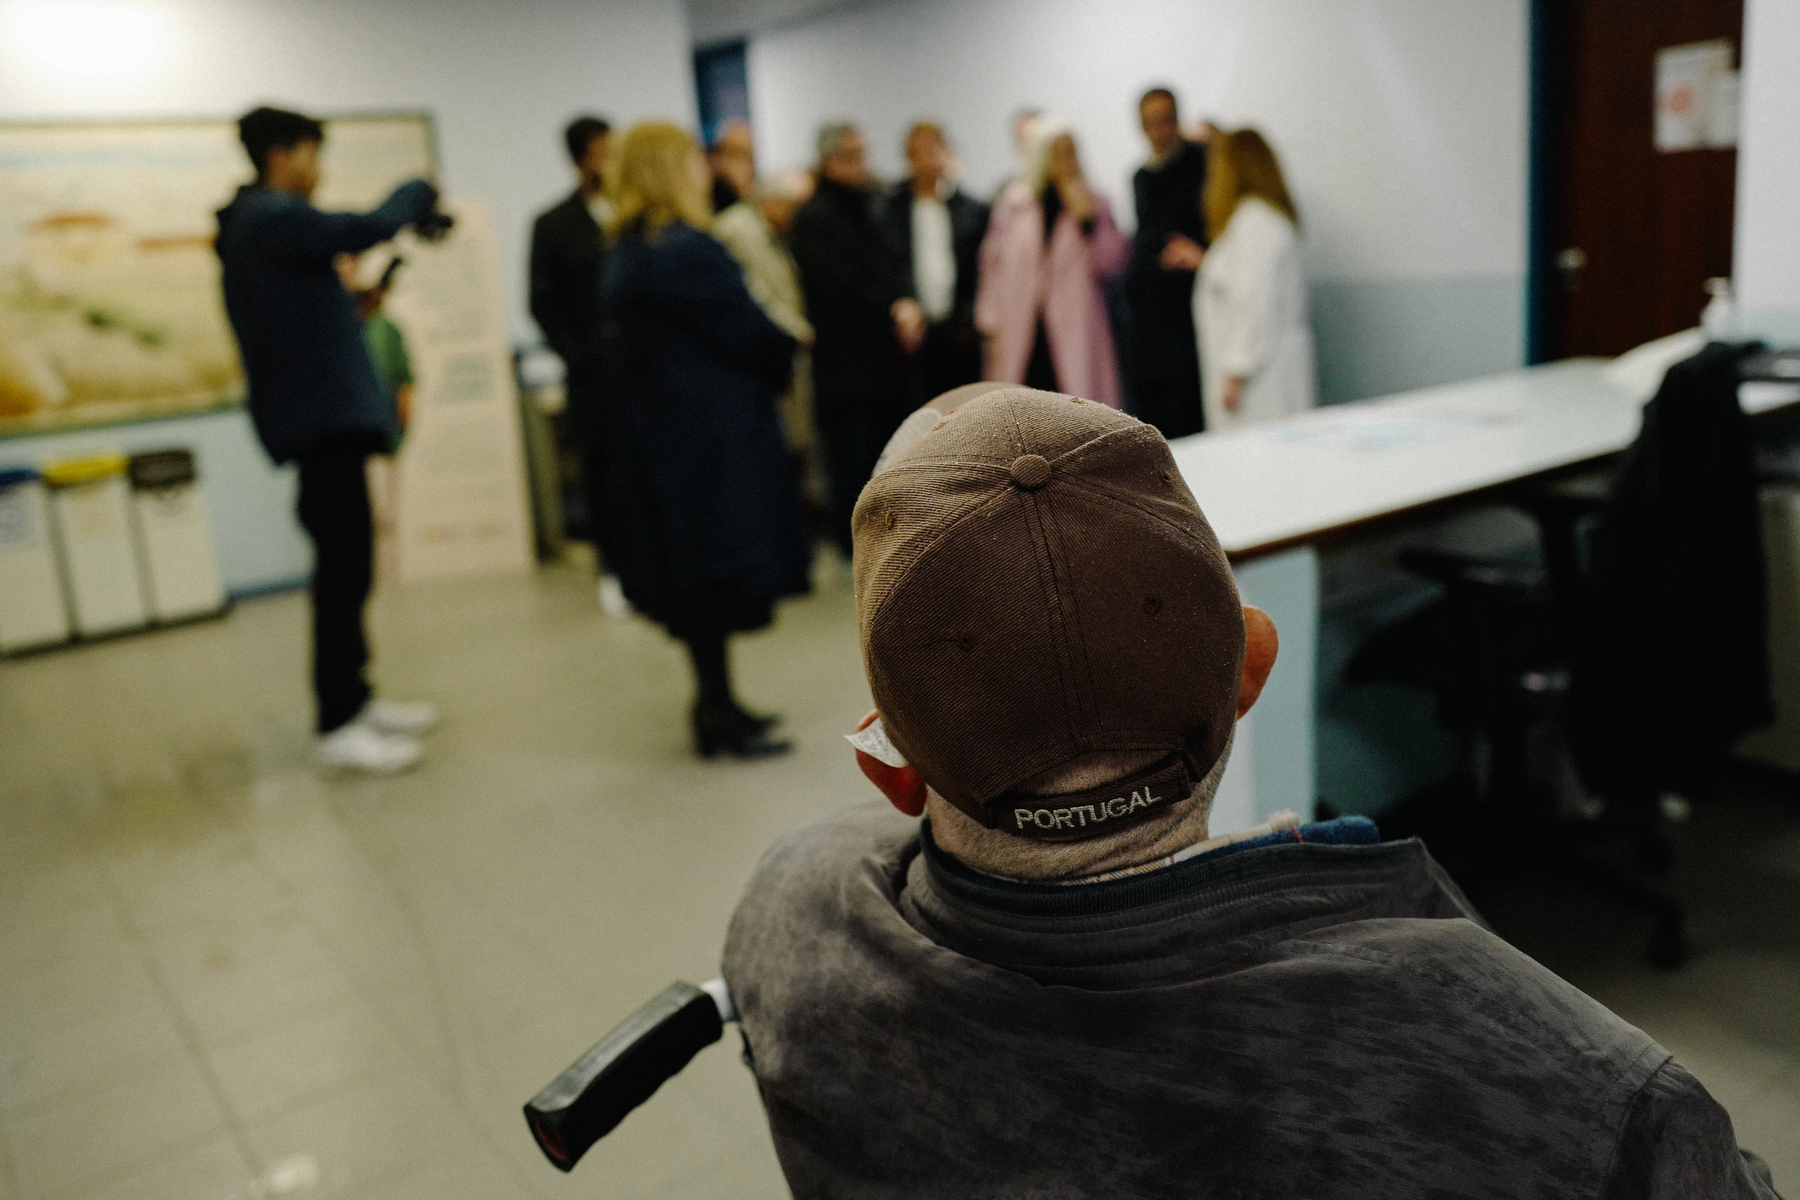 A person in a wheelchair wearing a hat with &ldquo;Portugal&rdquo; on it is facing a group of standing people who appear to be engaged in a conversation, while another person is taking a photo of the group. The setting seems to be an indoor room.